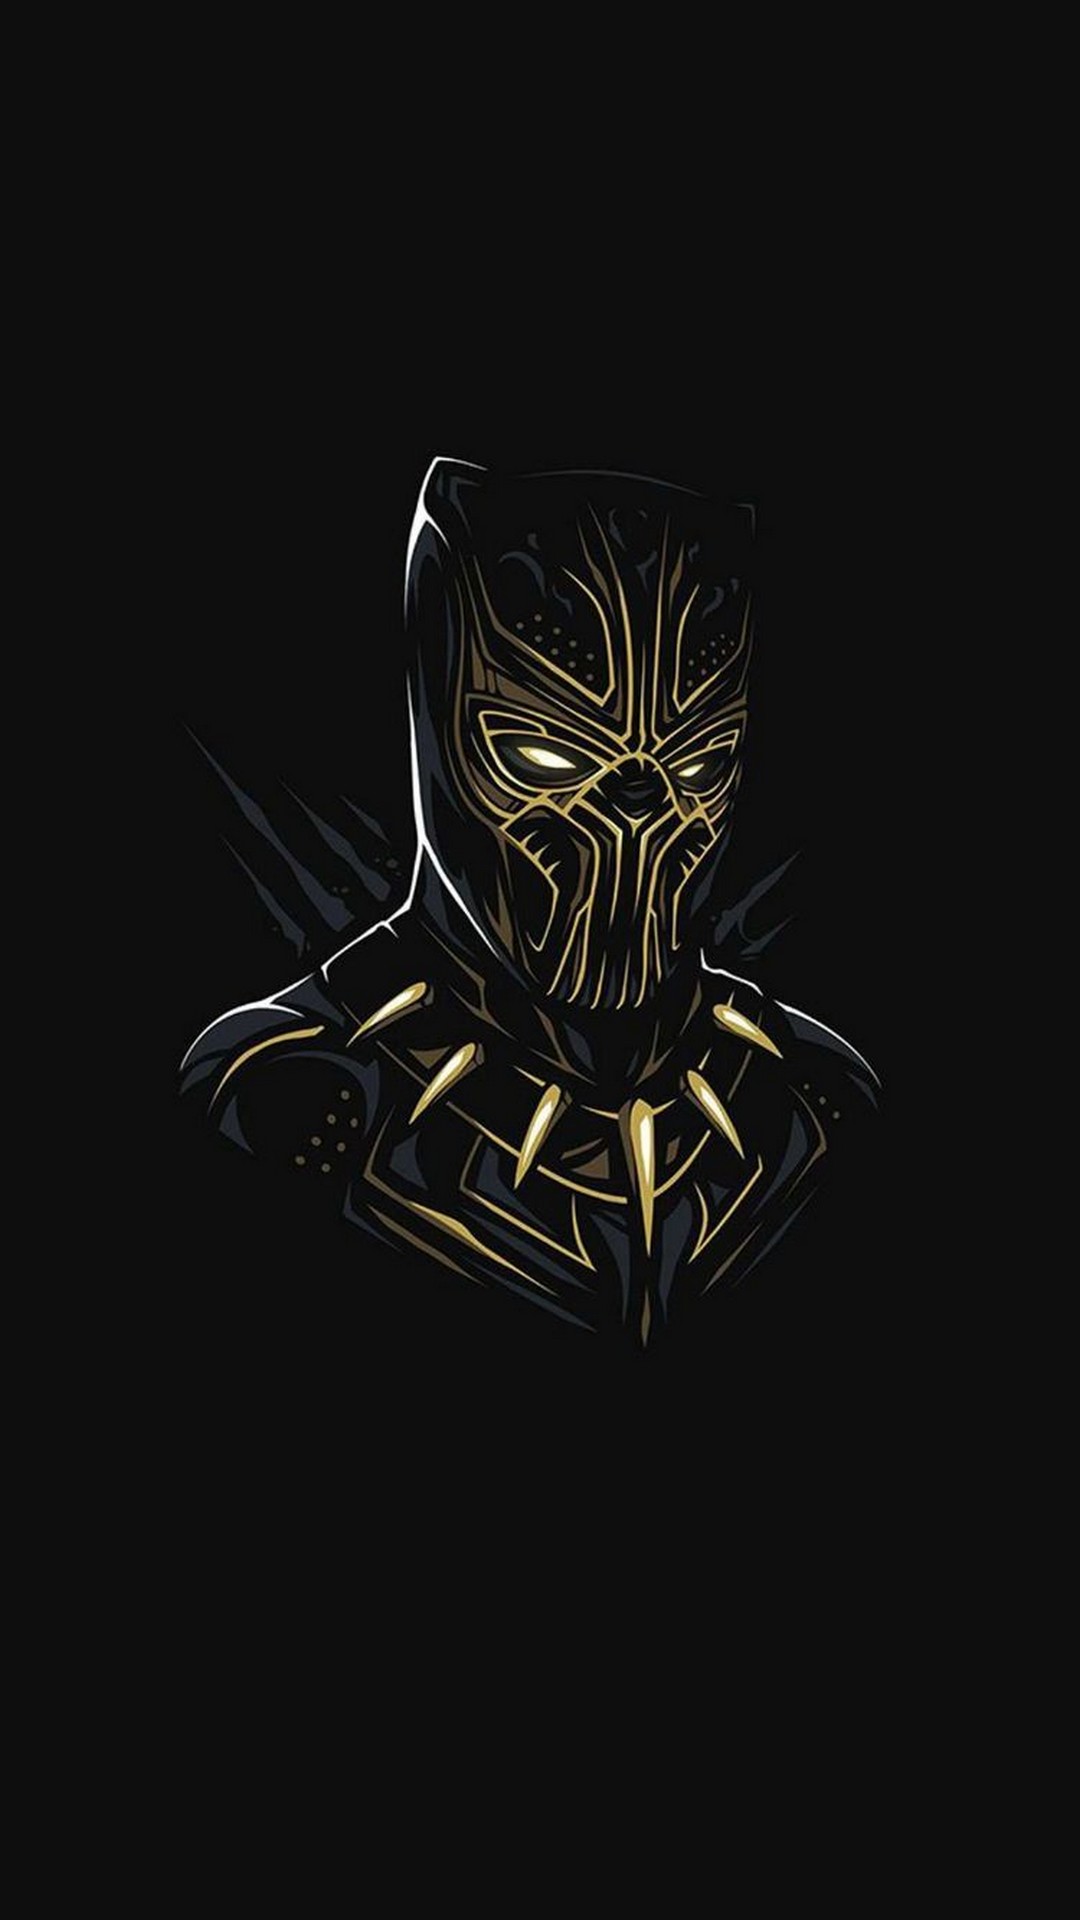 Black Panther iPhone Wallpaper in HD With high-resolution 1080X1920 pixel. You can set as wallpaper for Apple iPhone X, XS Max, XR, 8, 7, 6, SE, iPad. Enjoy and share your favorite HD wallpapers and background images